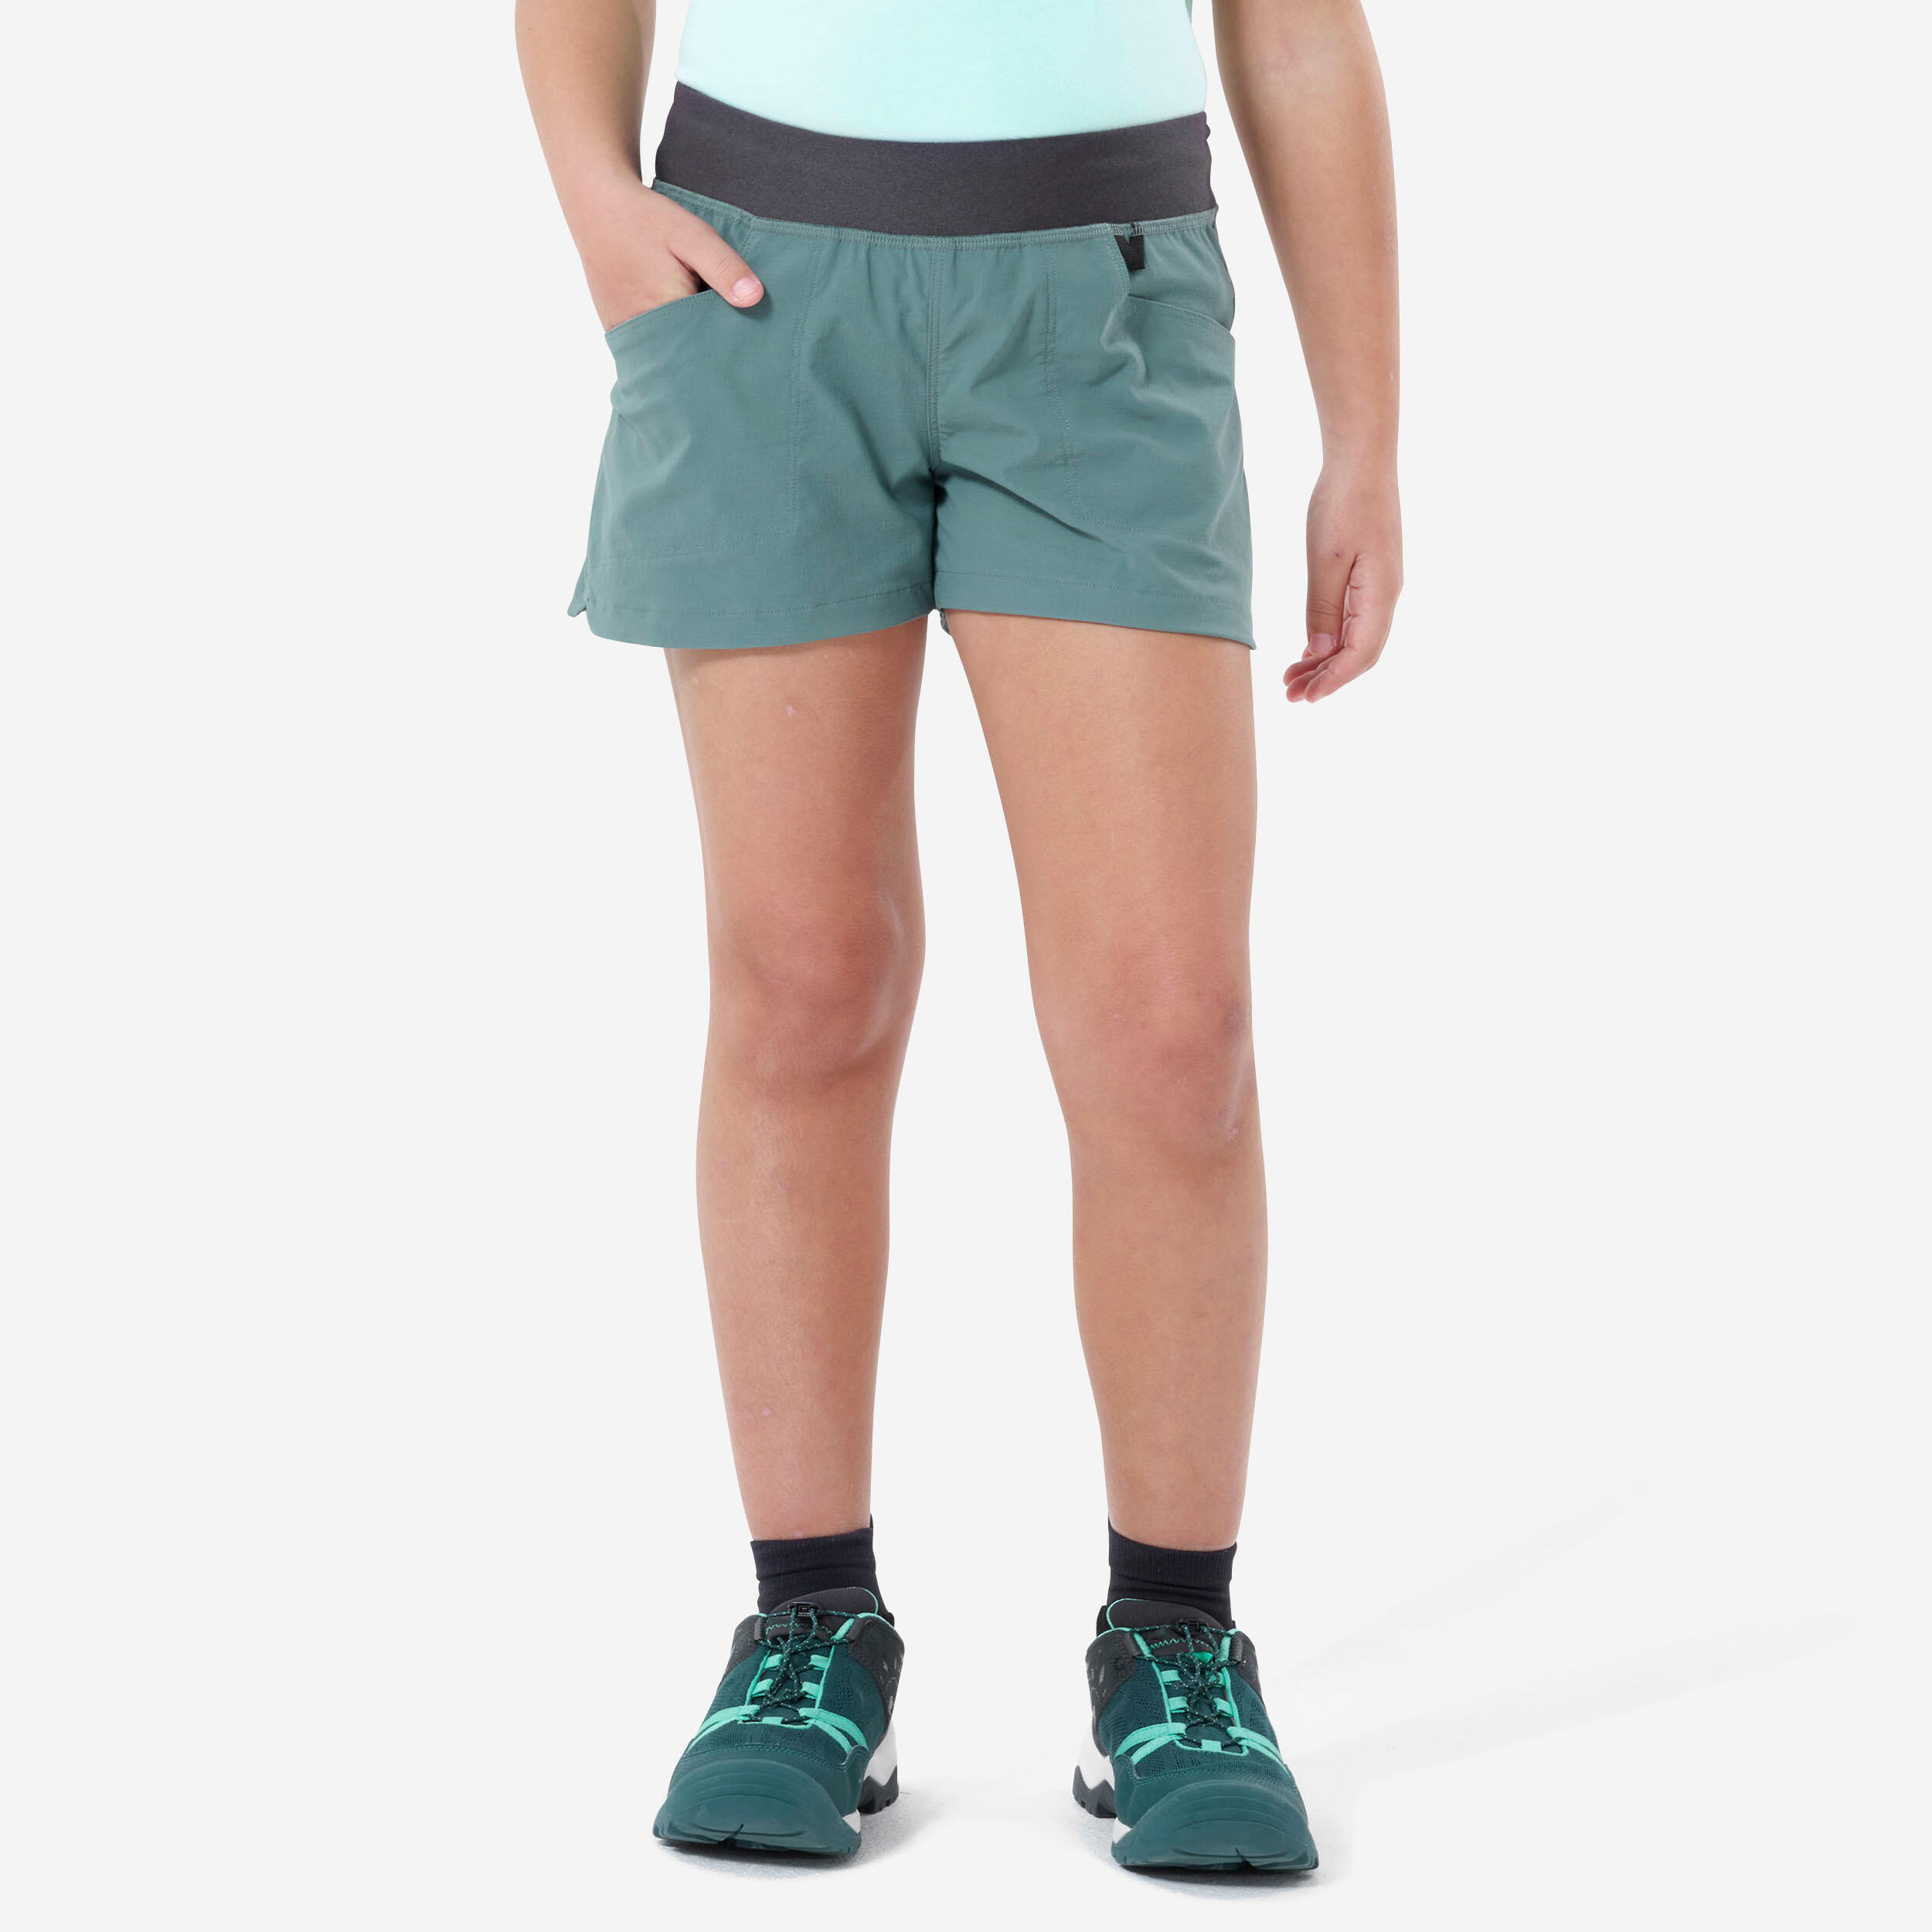 Kids' Hiking Shorts - MH500 Ages 7-15 - Grey QUECHUA